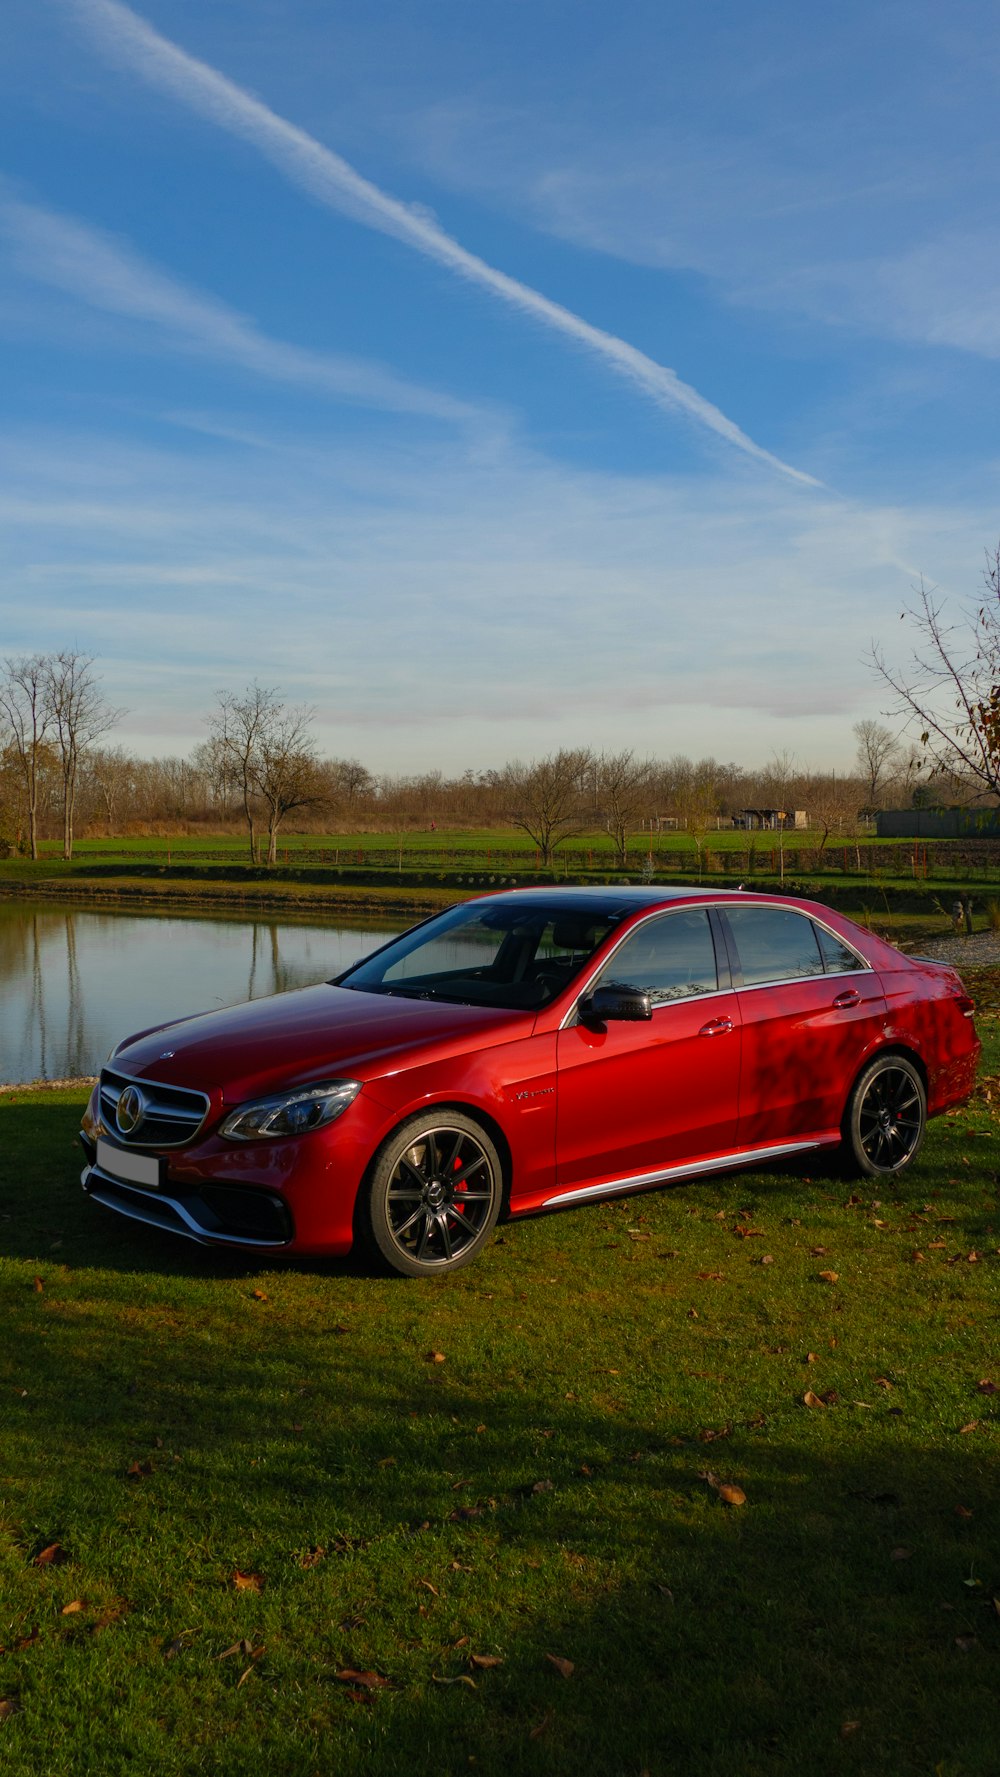 red sedan parked on green grass field near body of water during daytime